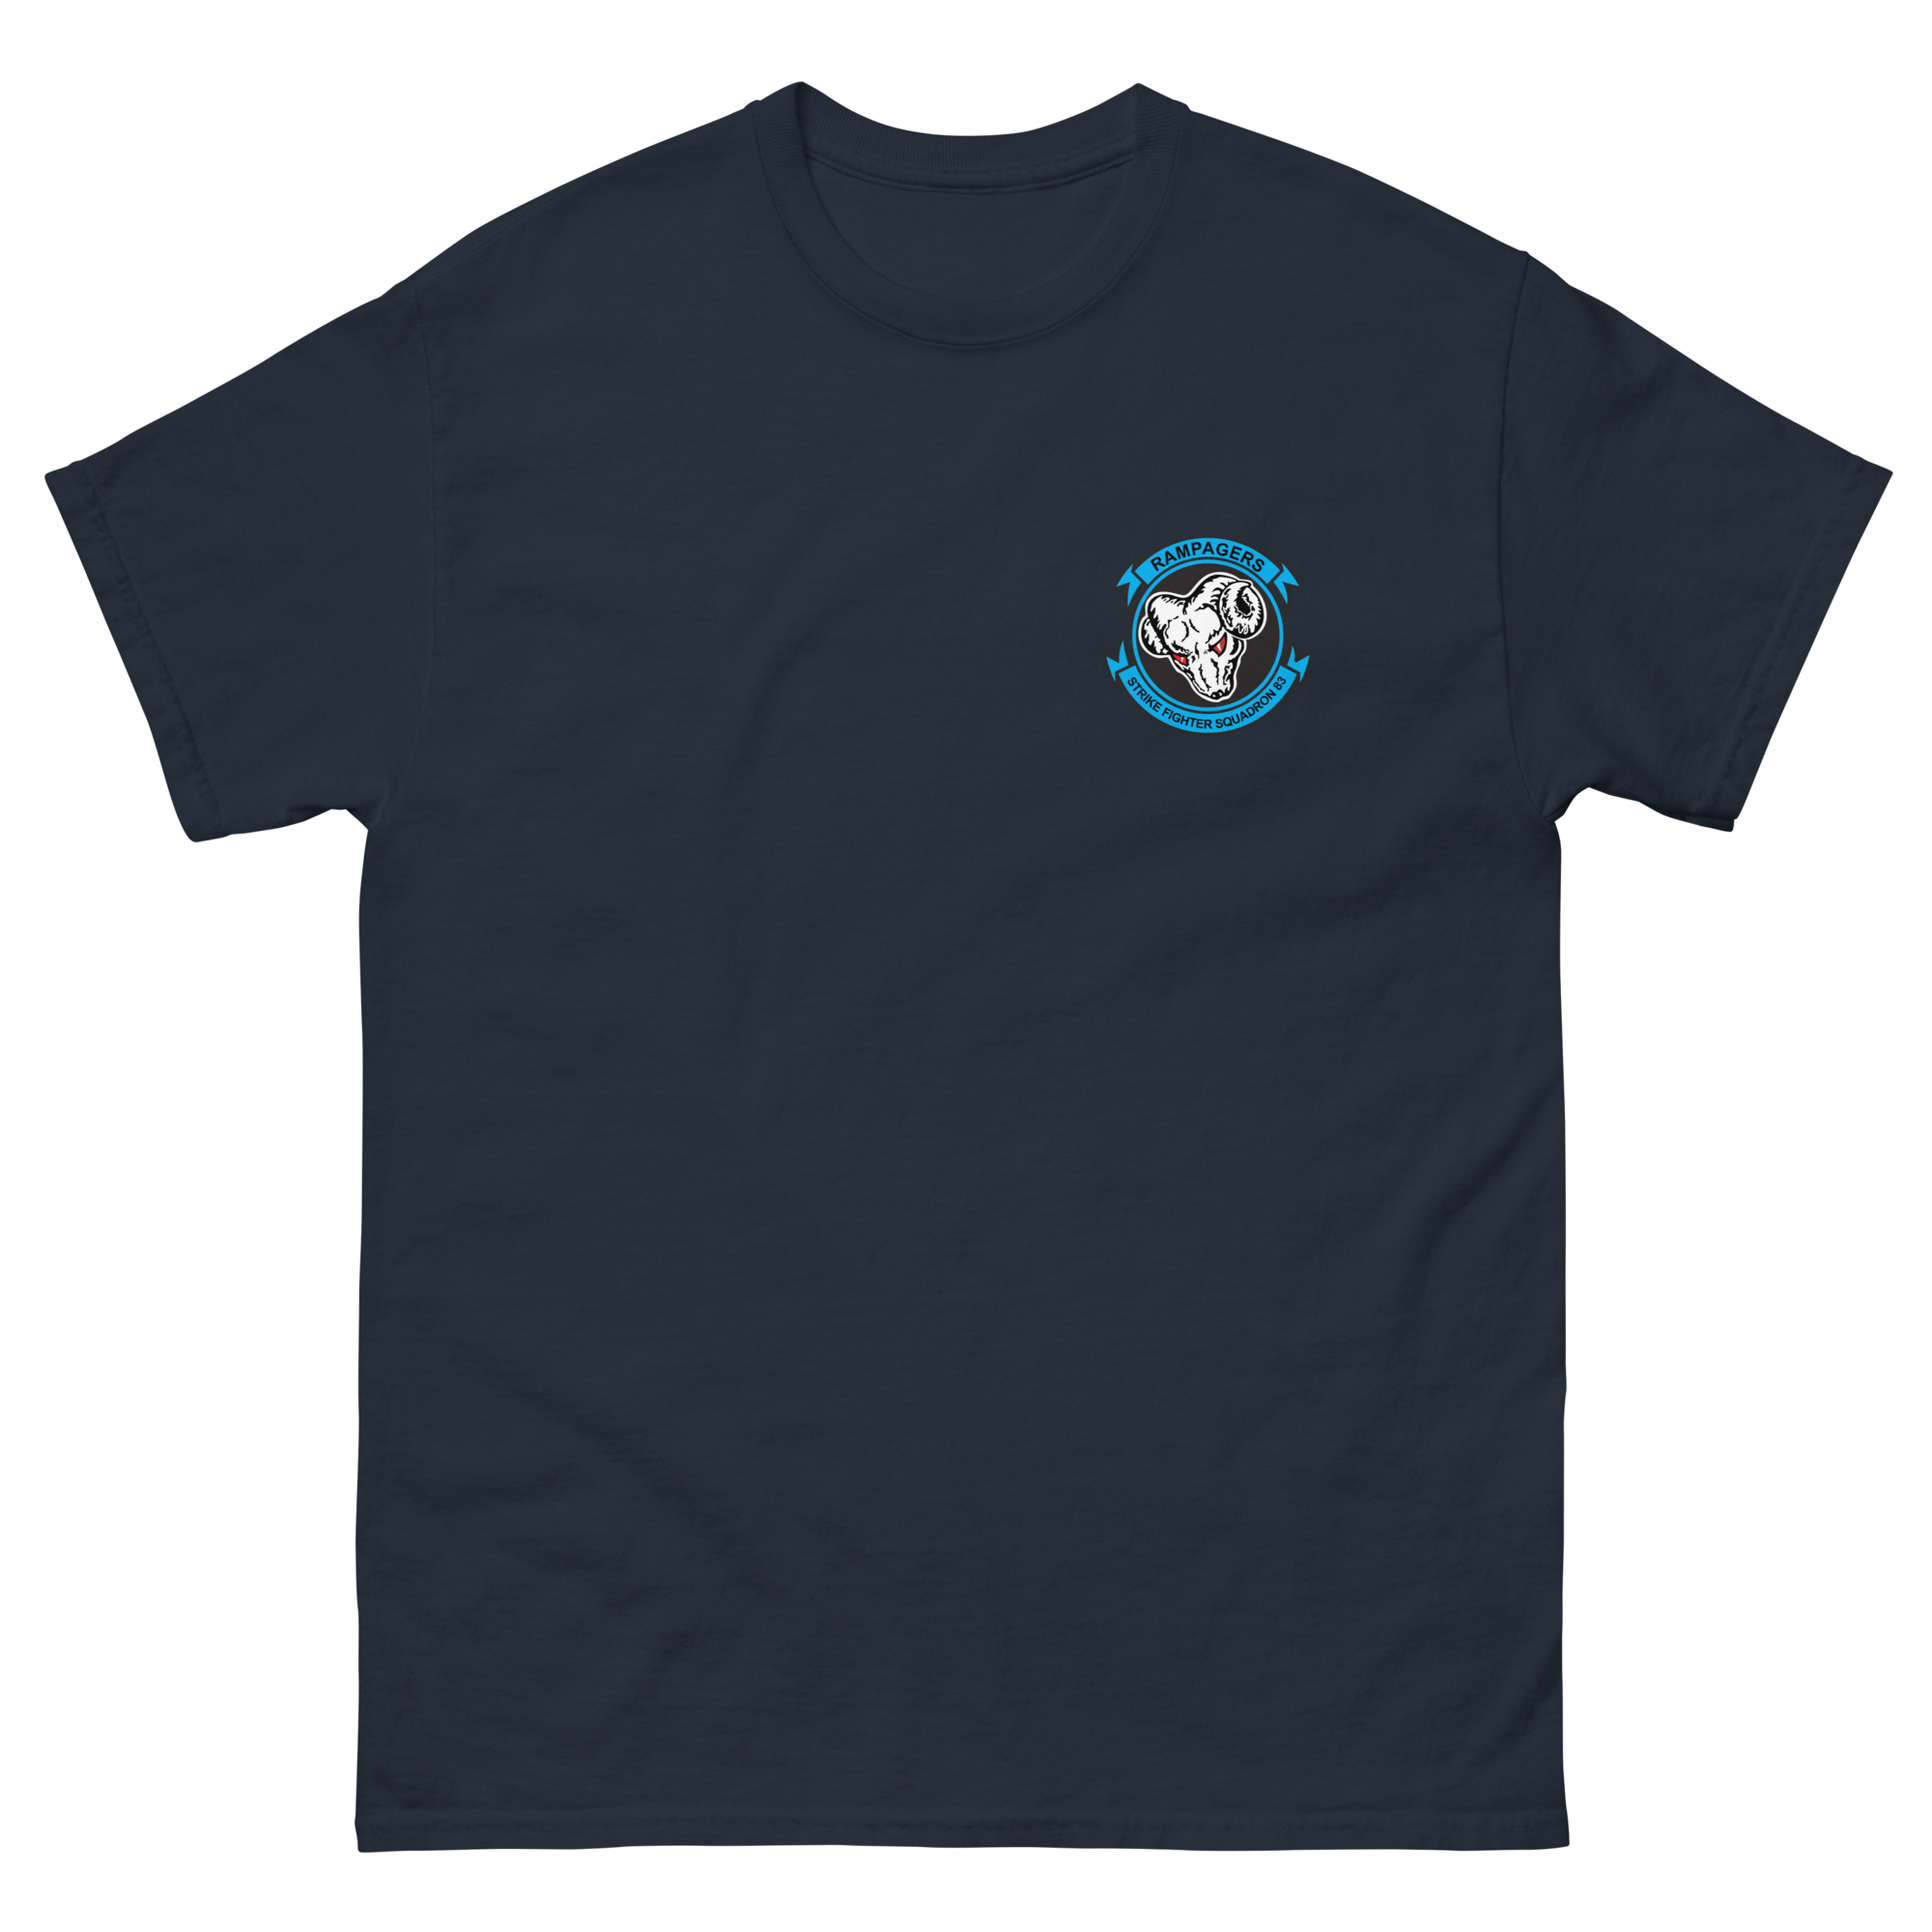 VFA-83 Rampagers Squadron Crest T-Shirt